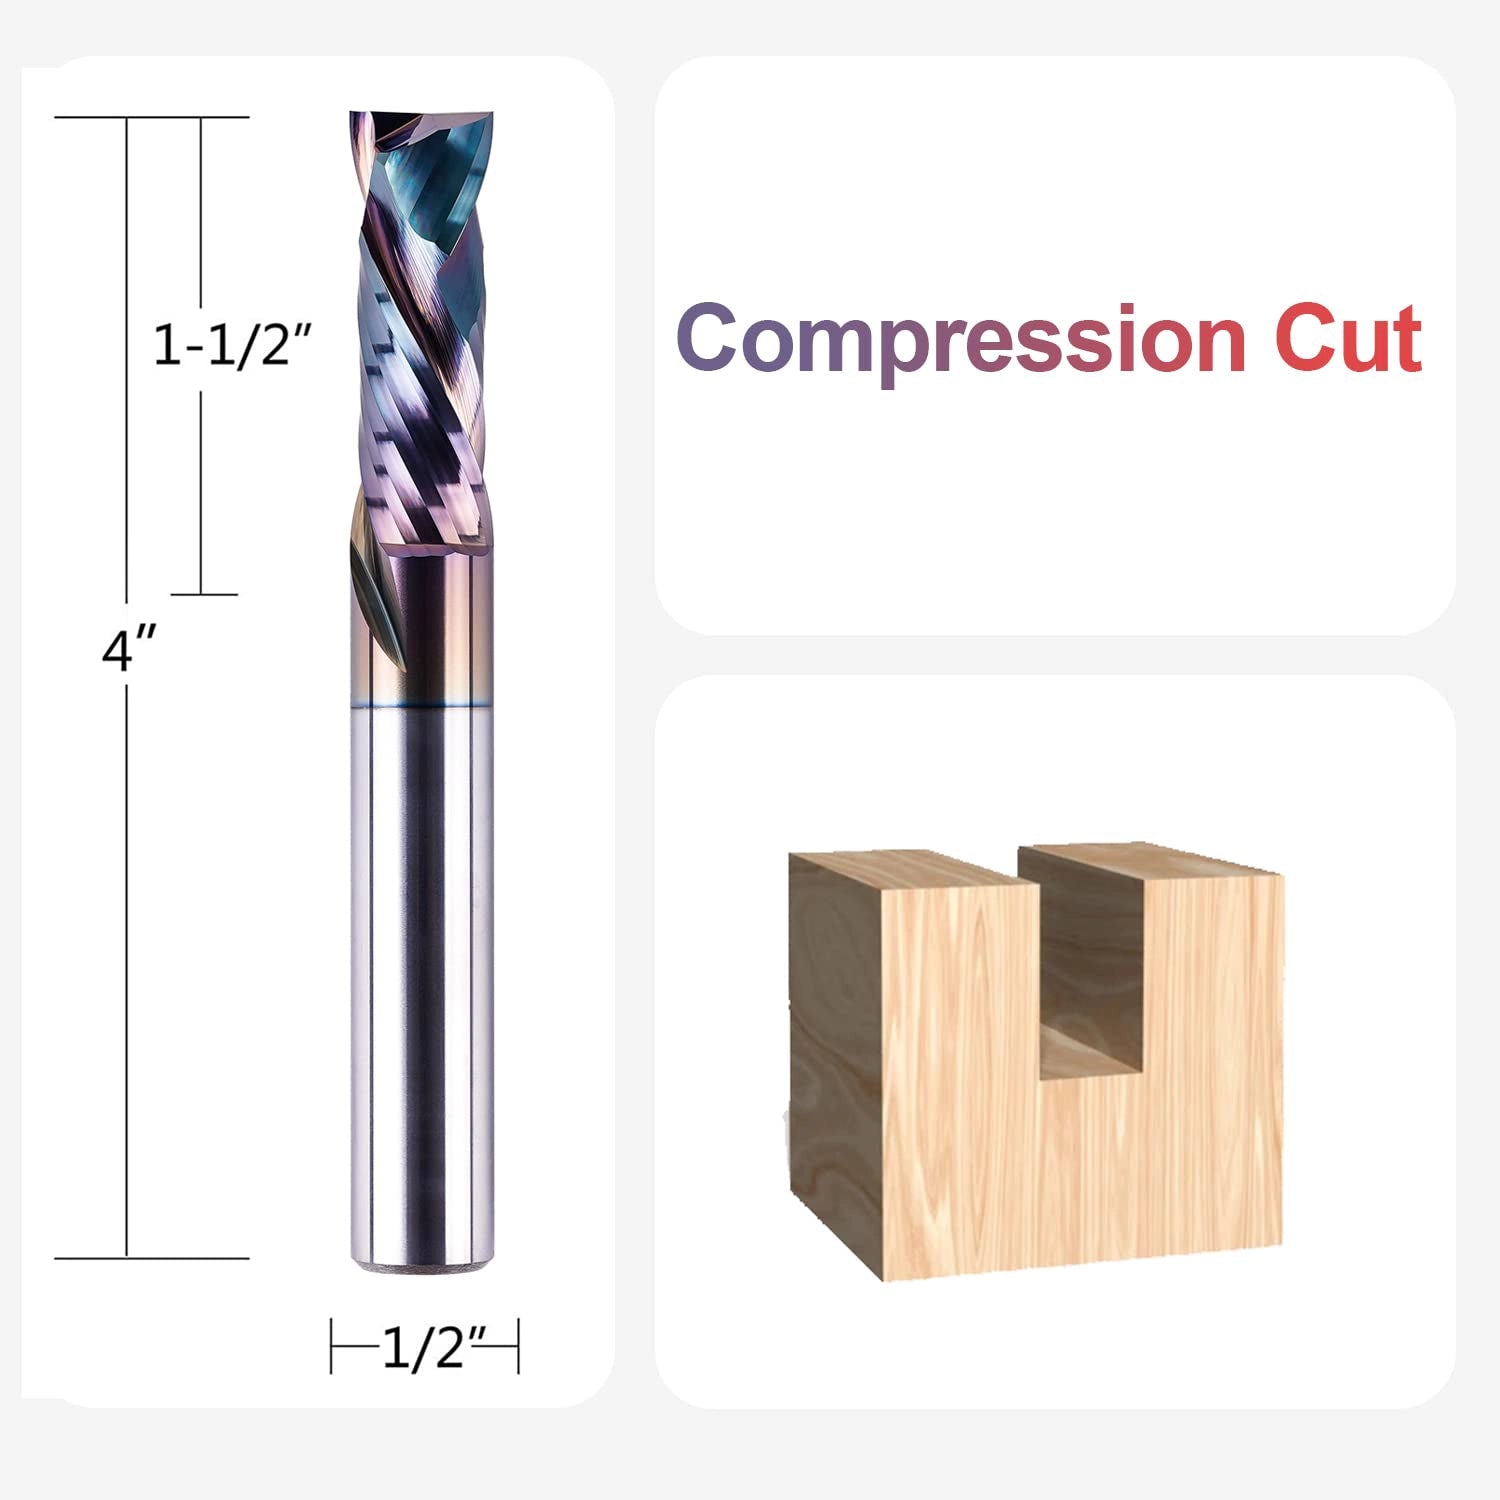 SpeTool W02006 SPE-X Ultra Tool Life Coated SC Compression Spiral 1/2" Dia x 1/2" Shank x 1-1/2" Cutting Length x 4" Extra Long 2 Flute Router Bit